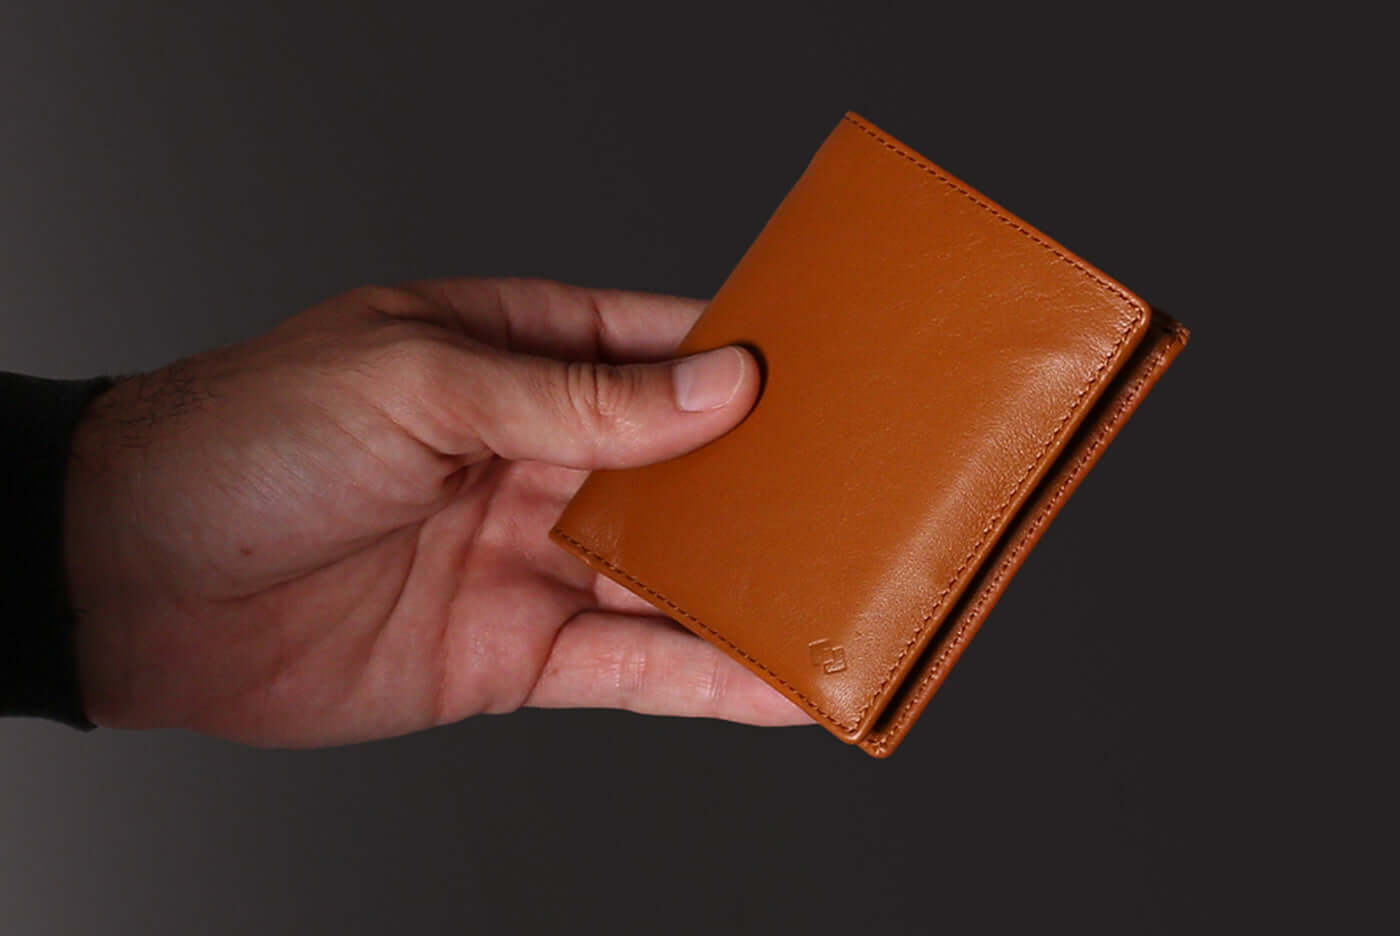 Mens leather goods · Mens wallet · Card holder | A.P.C.